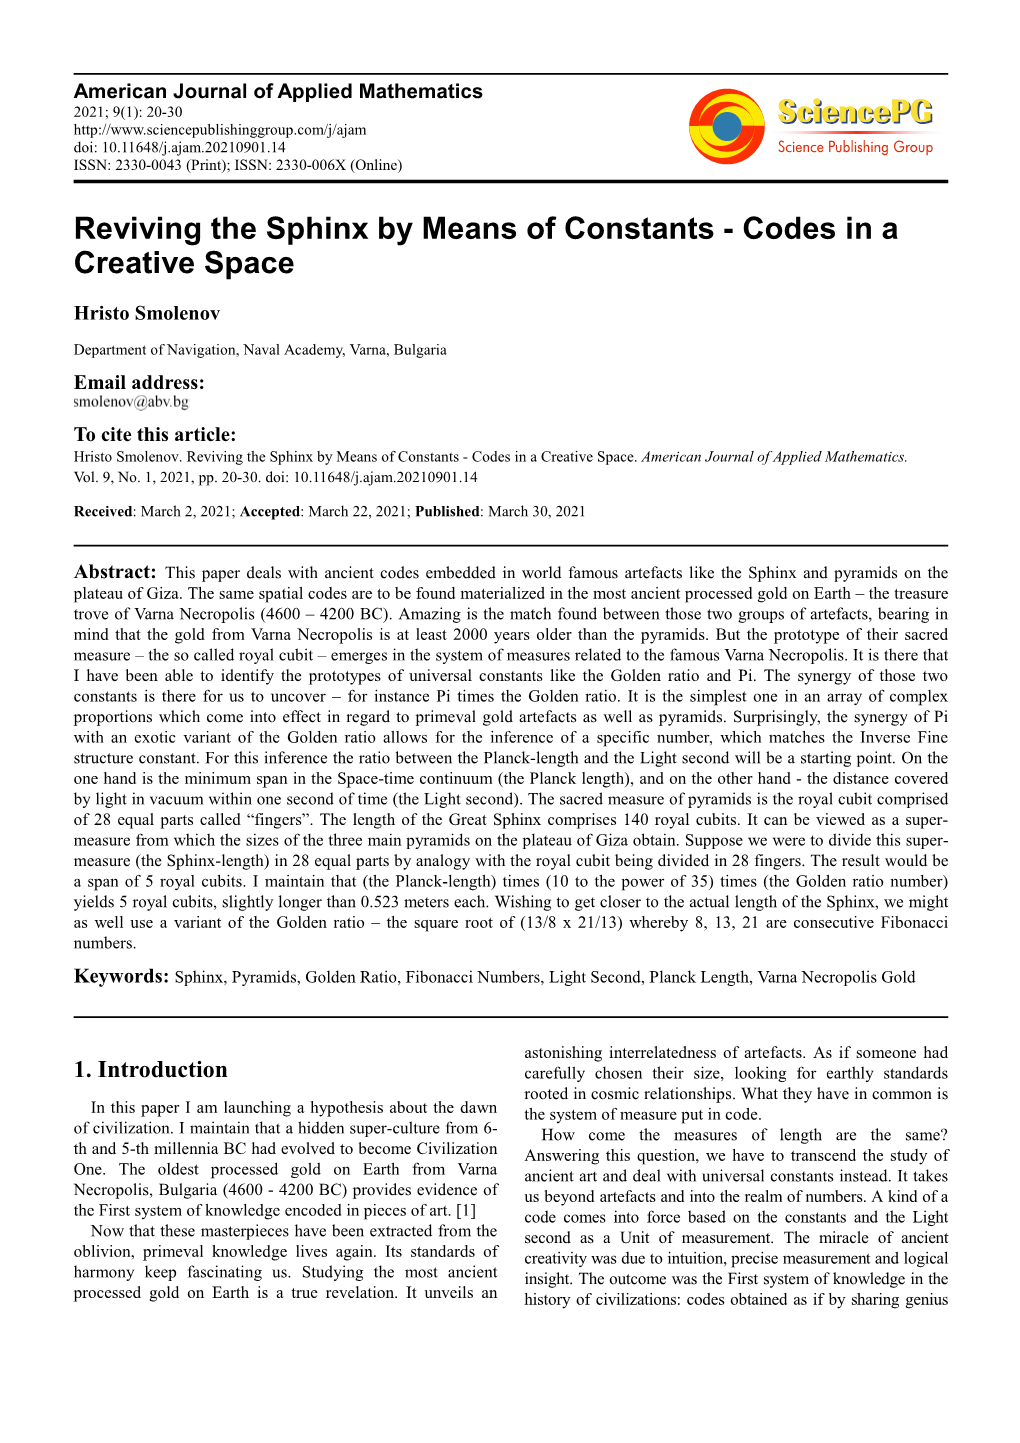 Codes in a Creative Space